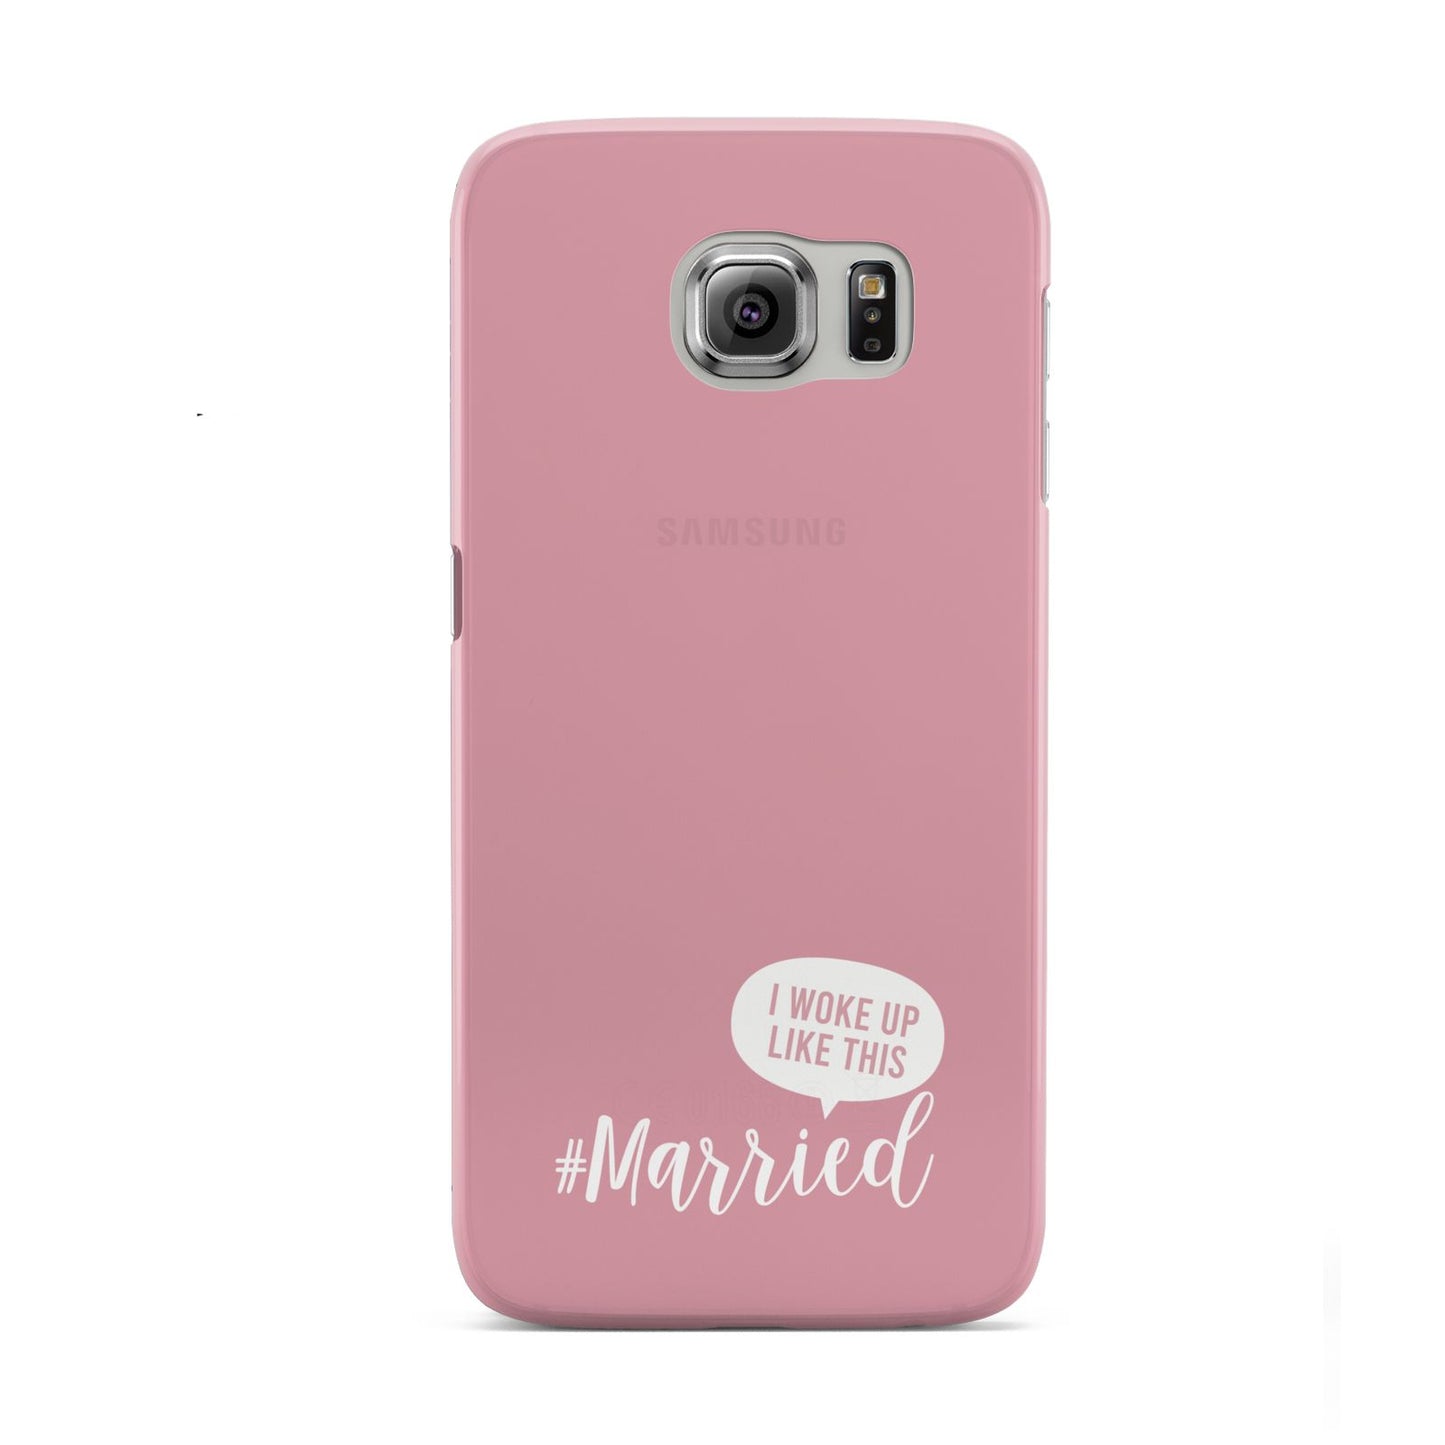 I Woke Up Like This Married Samsung Galaxy S6 Case